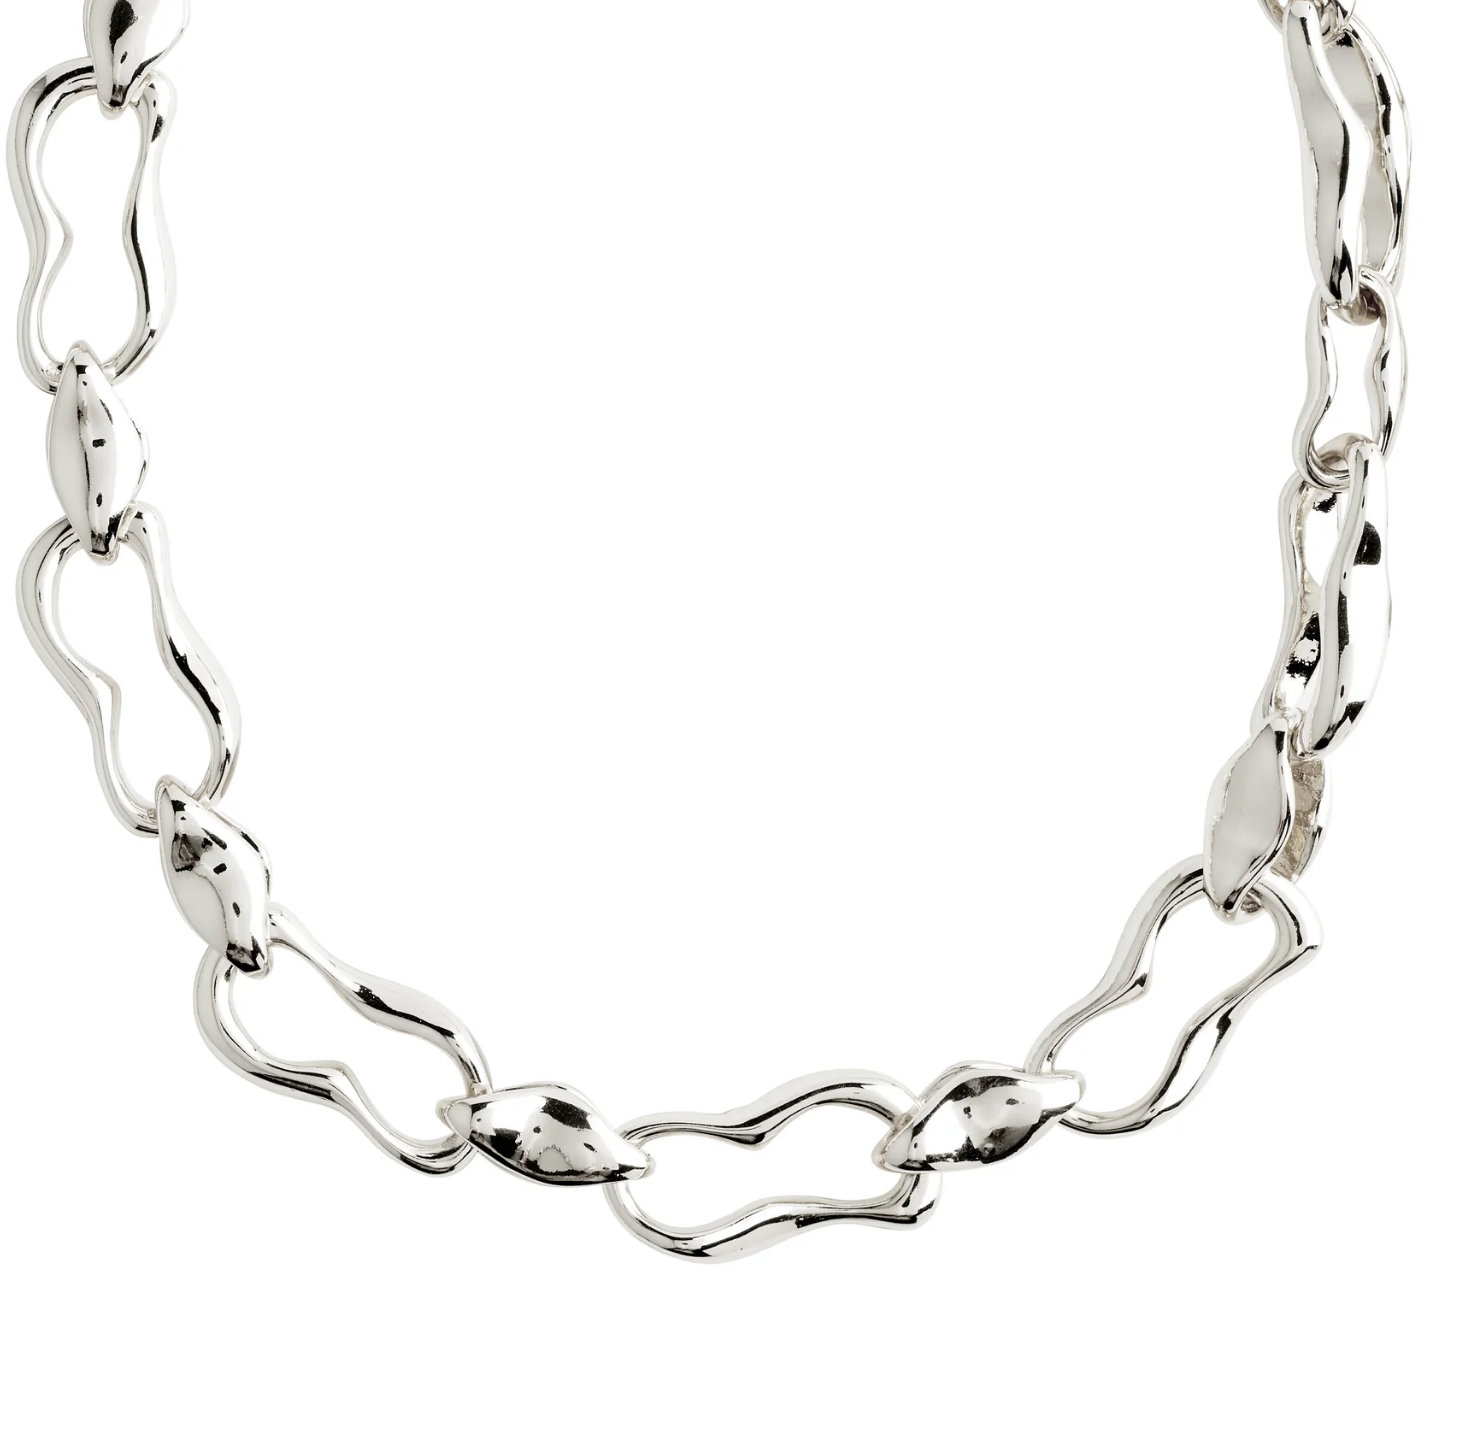 Pilgrim Wave Recycled Necklace in Silver Plated